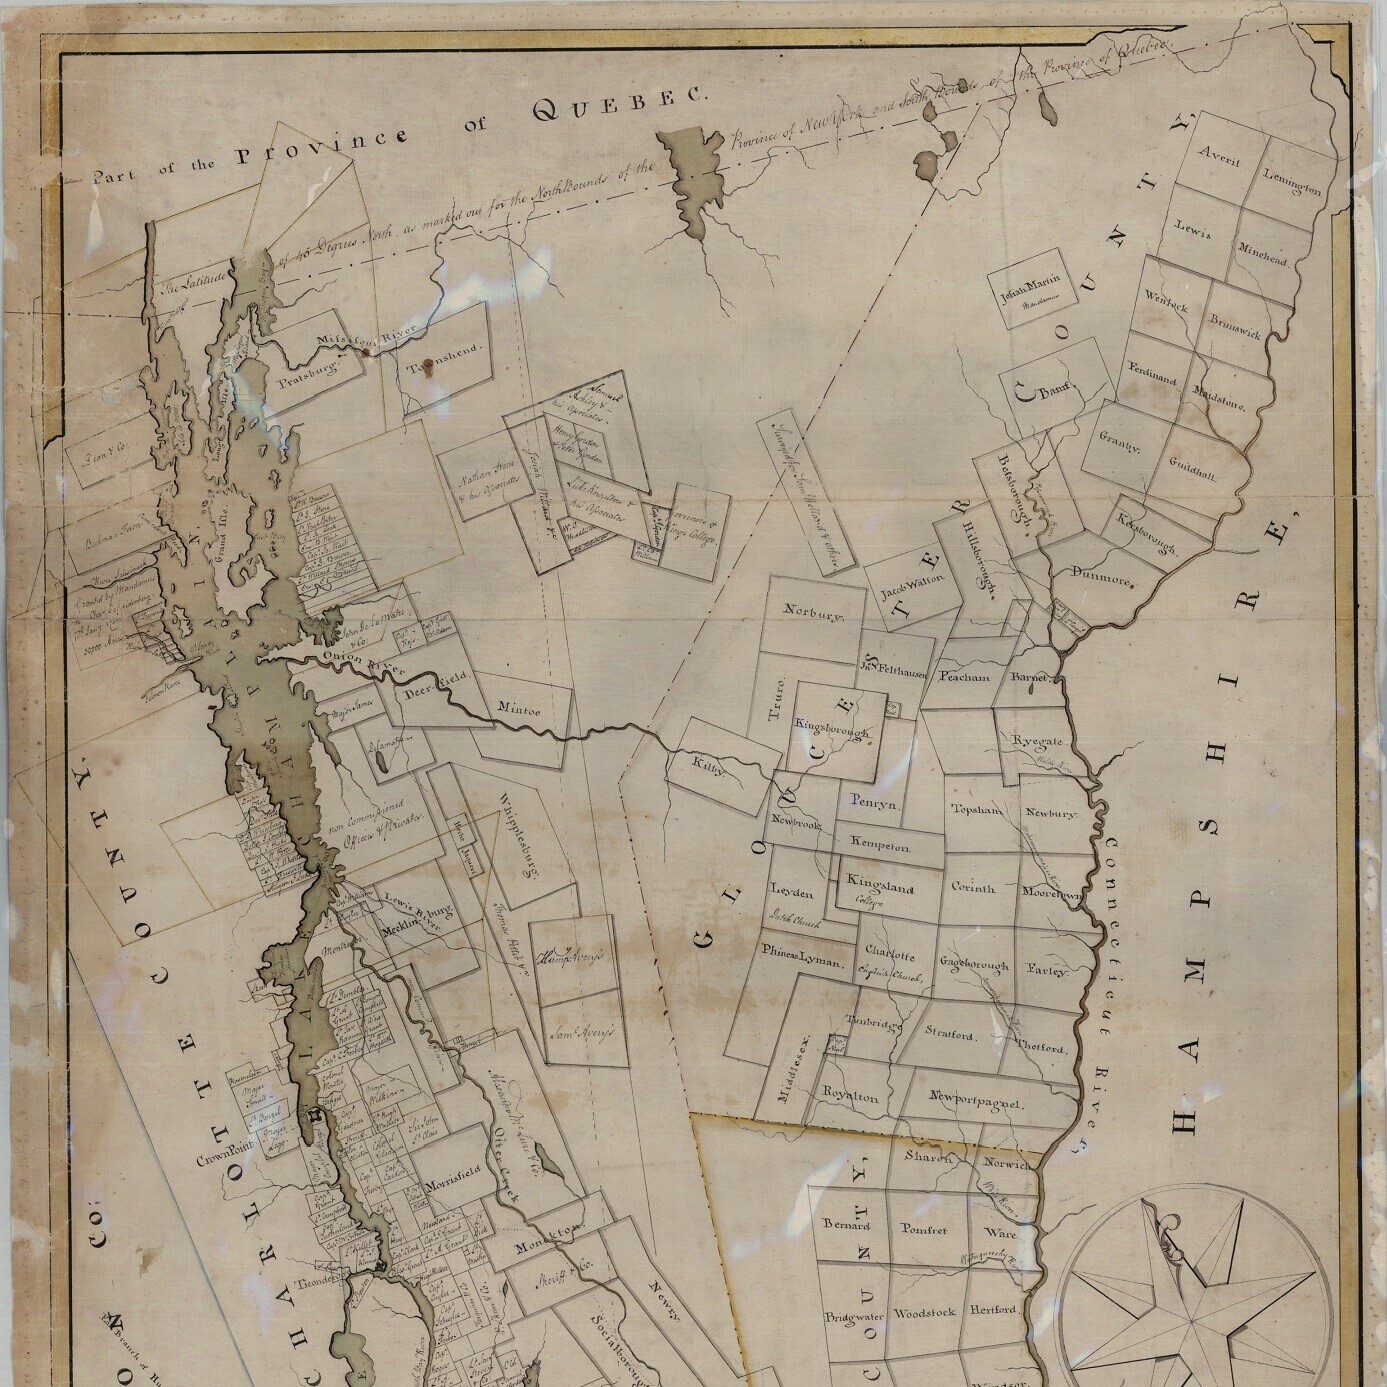 section of map of Vermont featuring New York Grants